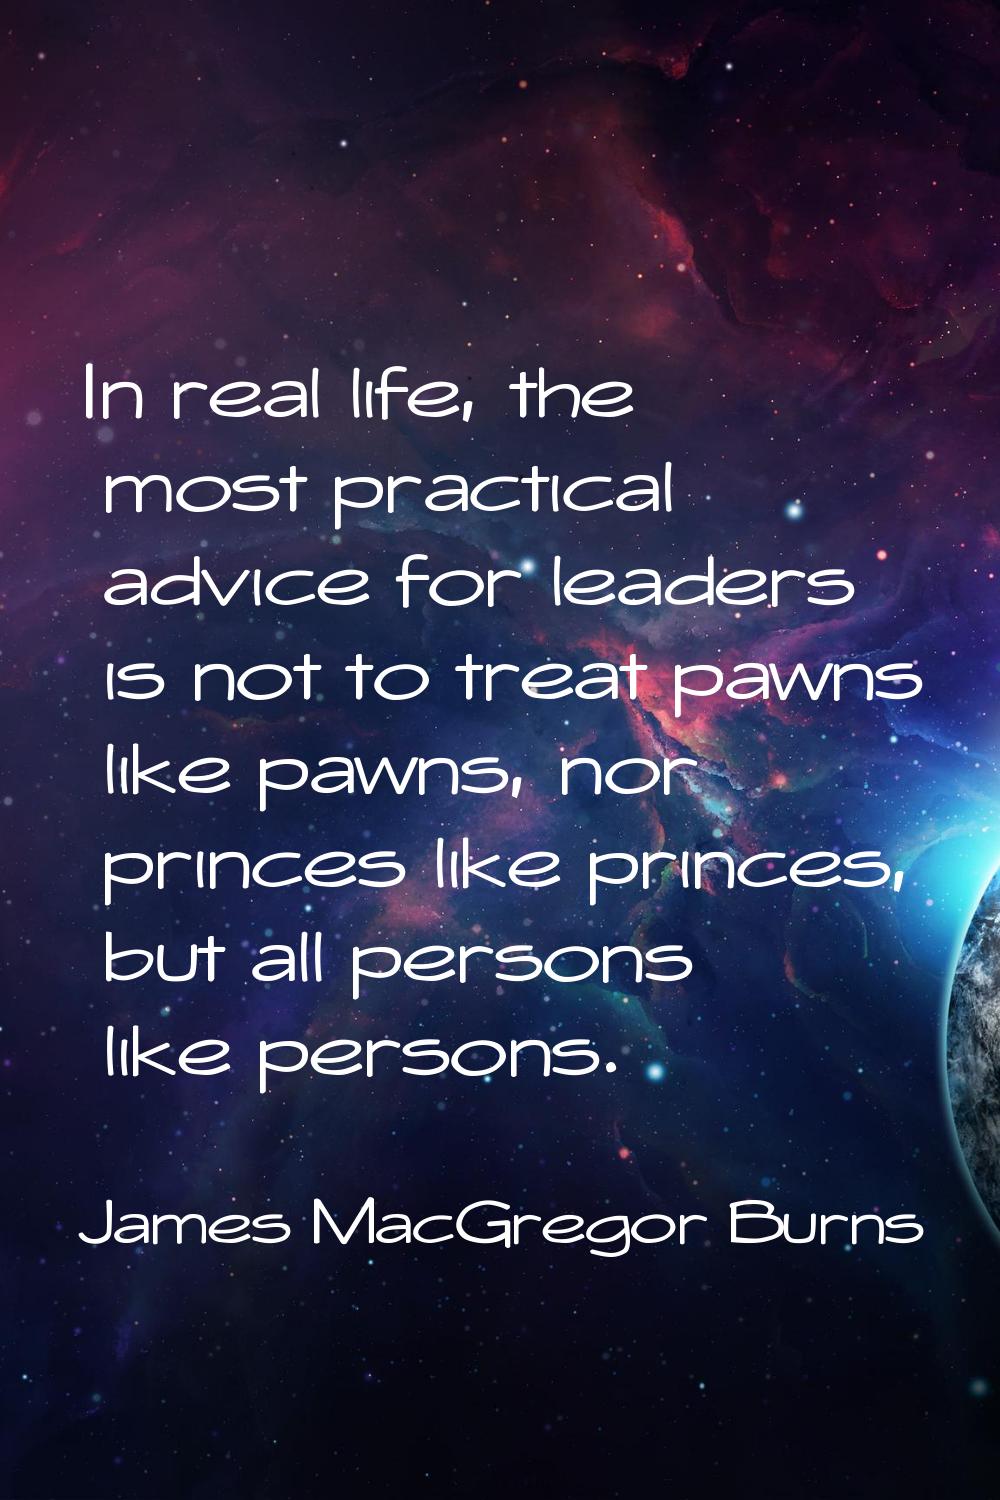 In real life, the most practical advice for leaders is not to treat pawns like pawns, nor princes l